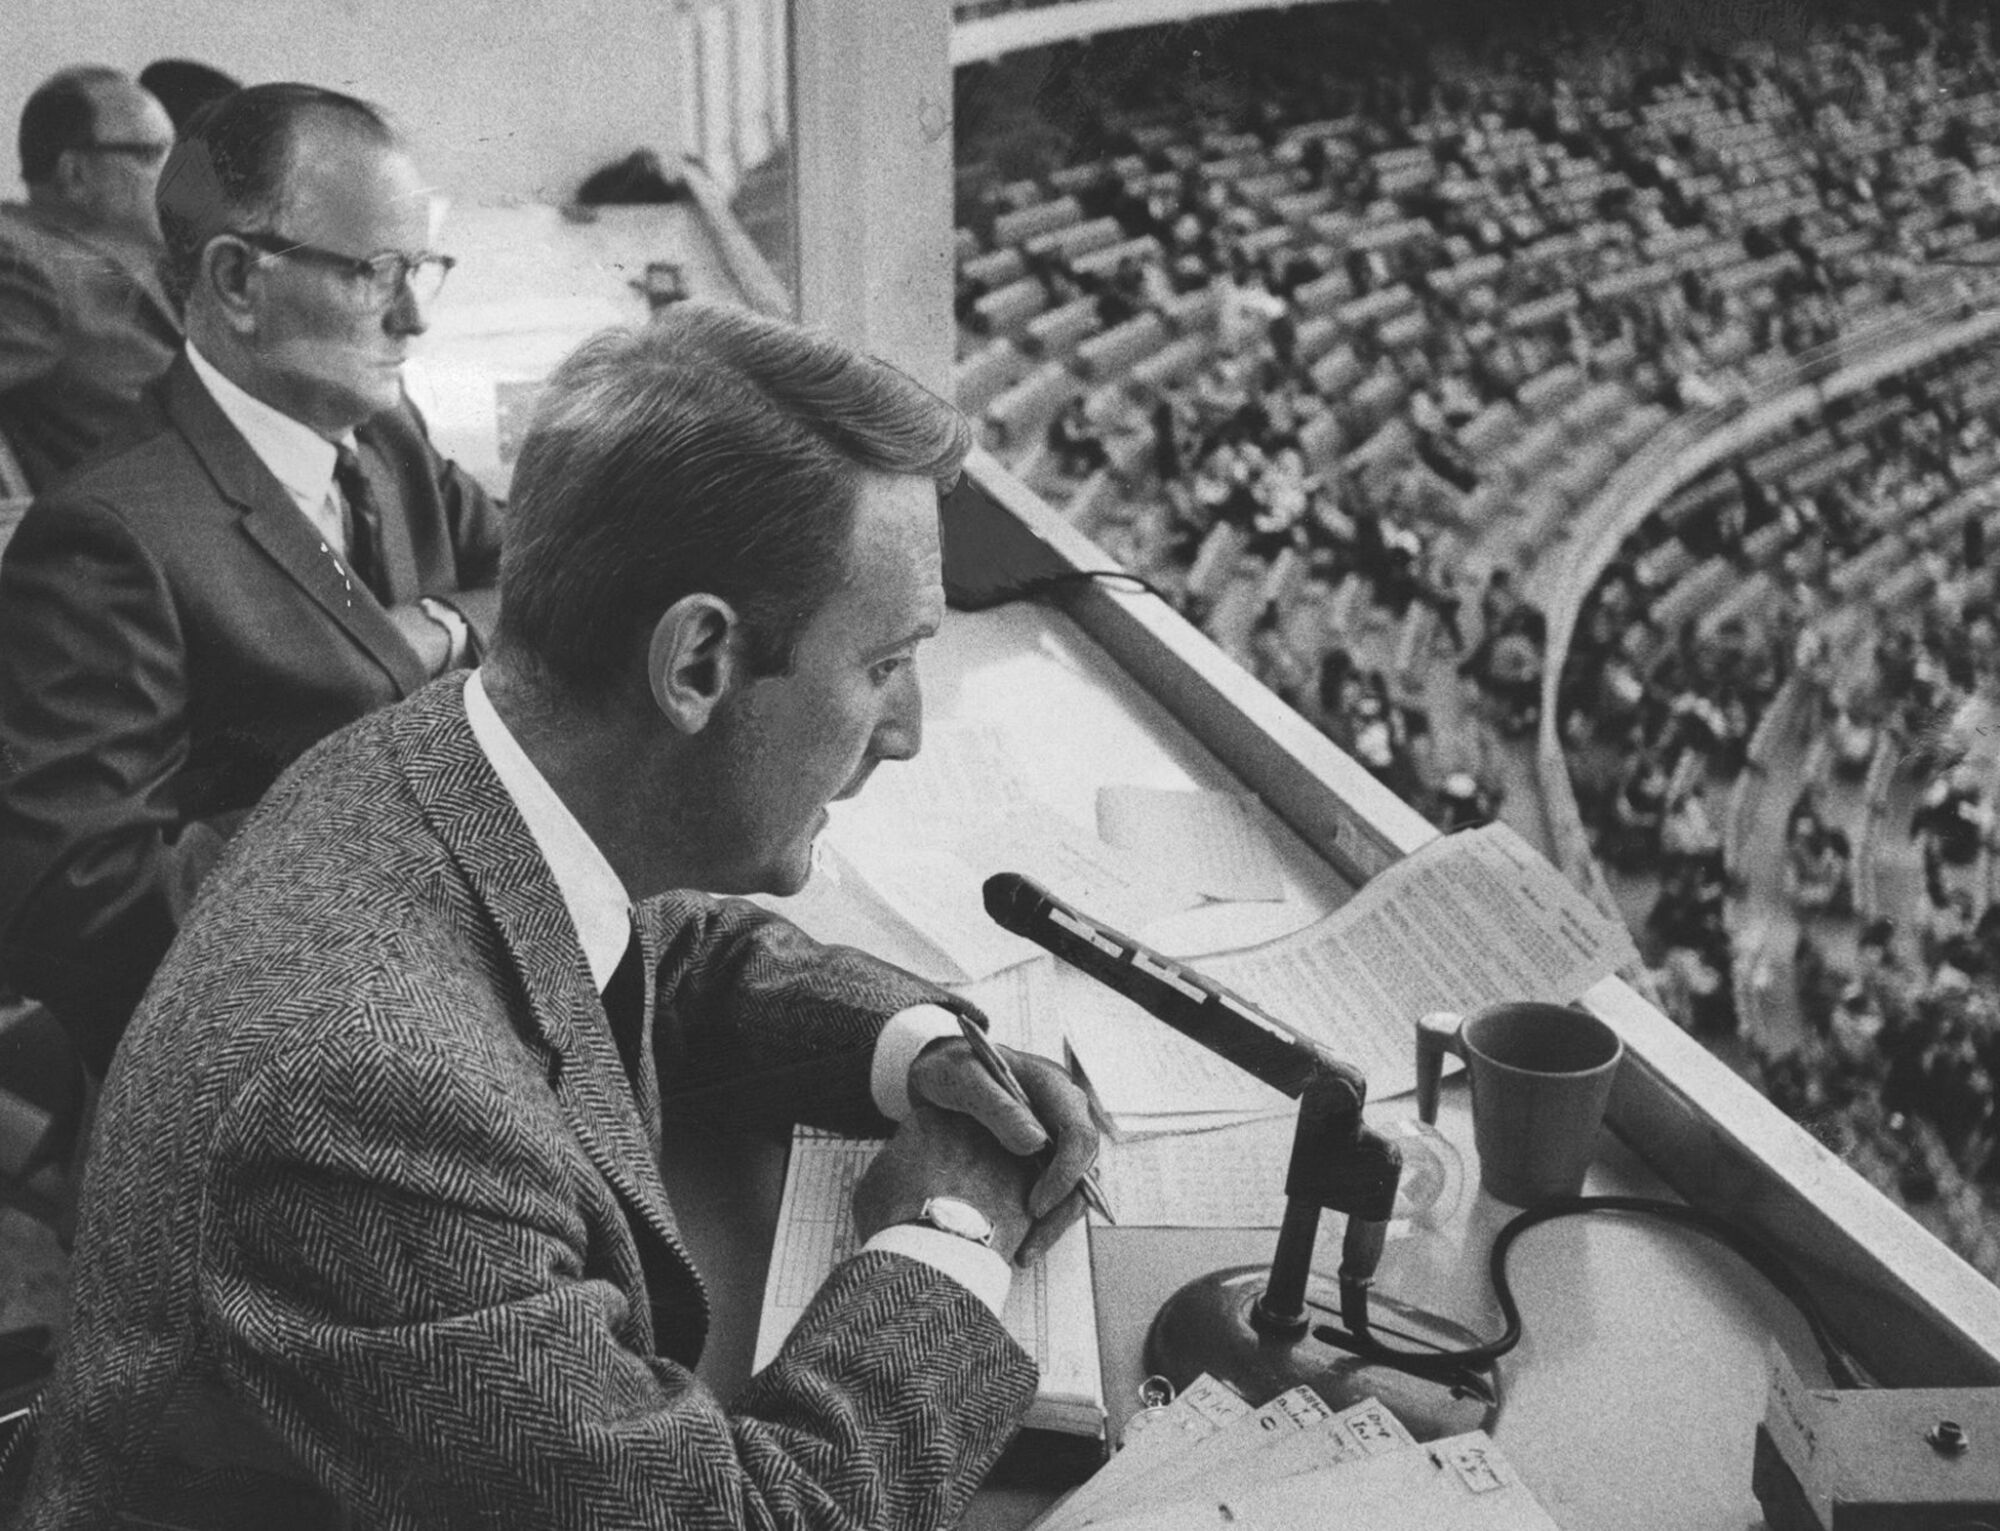 Vin Scully calls a Dodgers game in 1967. His soothing banter was compared to a warm breeze.